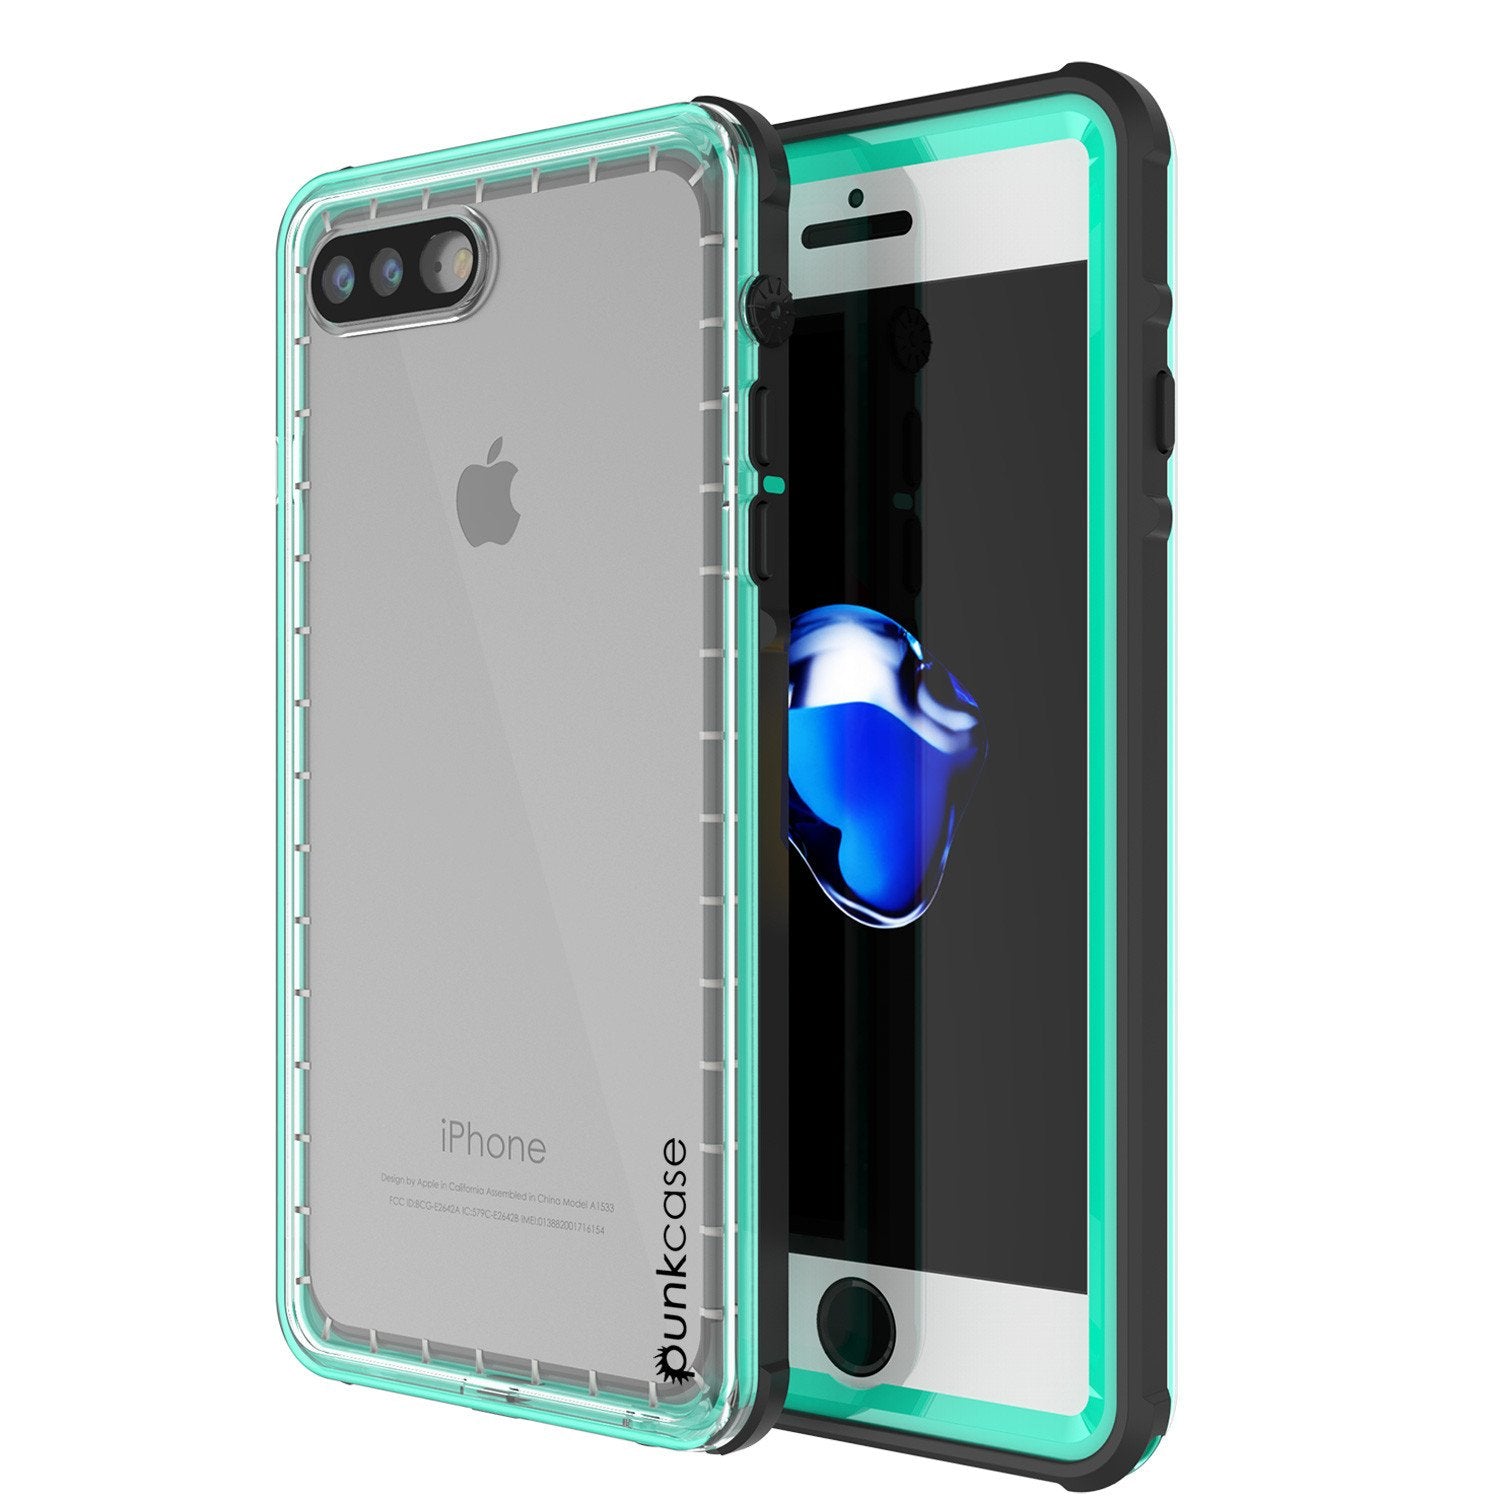 iPhone 7+ Plus Waterproof Case, PUNKcase CRYSTAL Teal W/ Attached Screen Protector  | Warranty